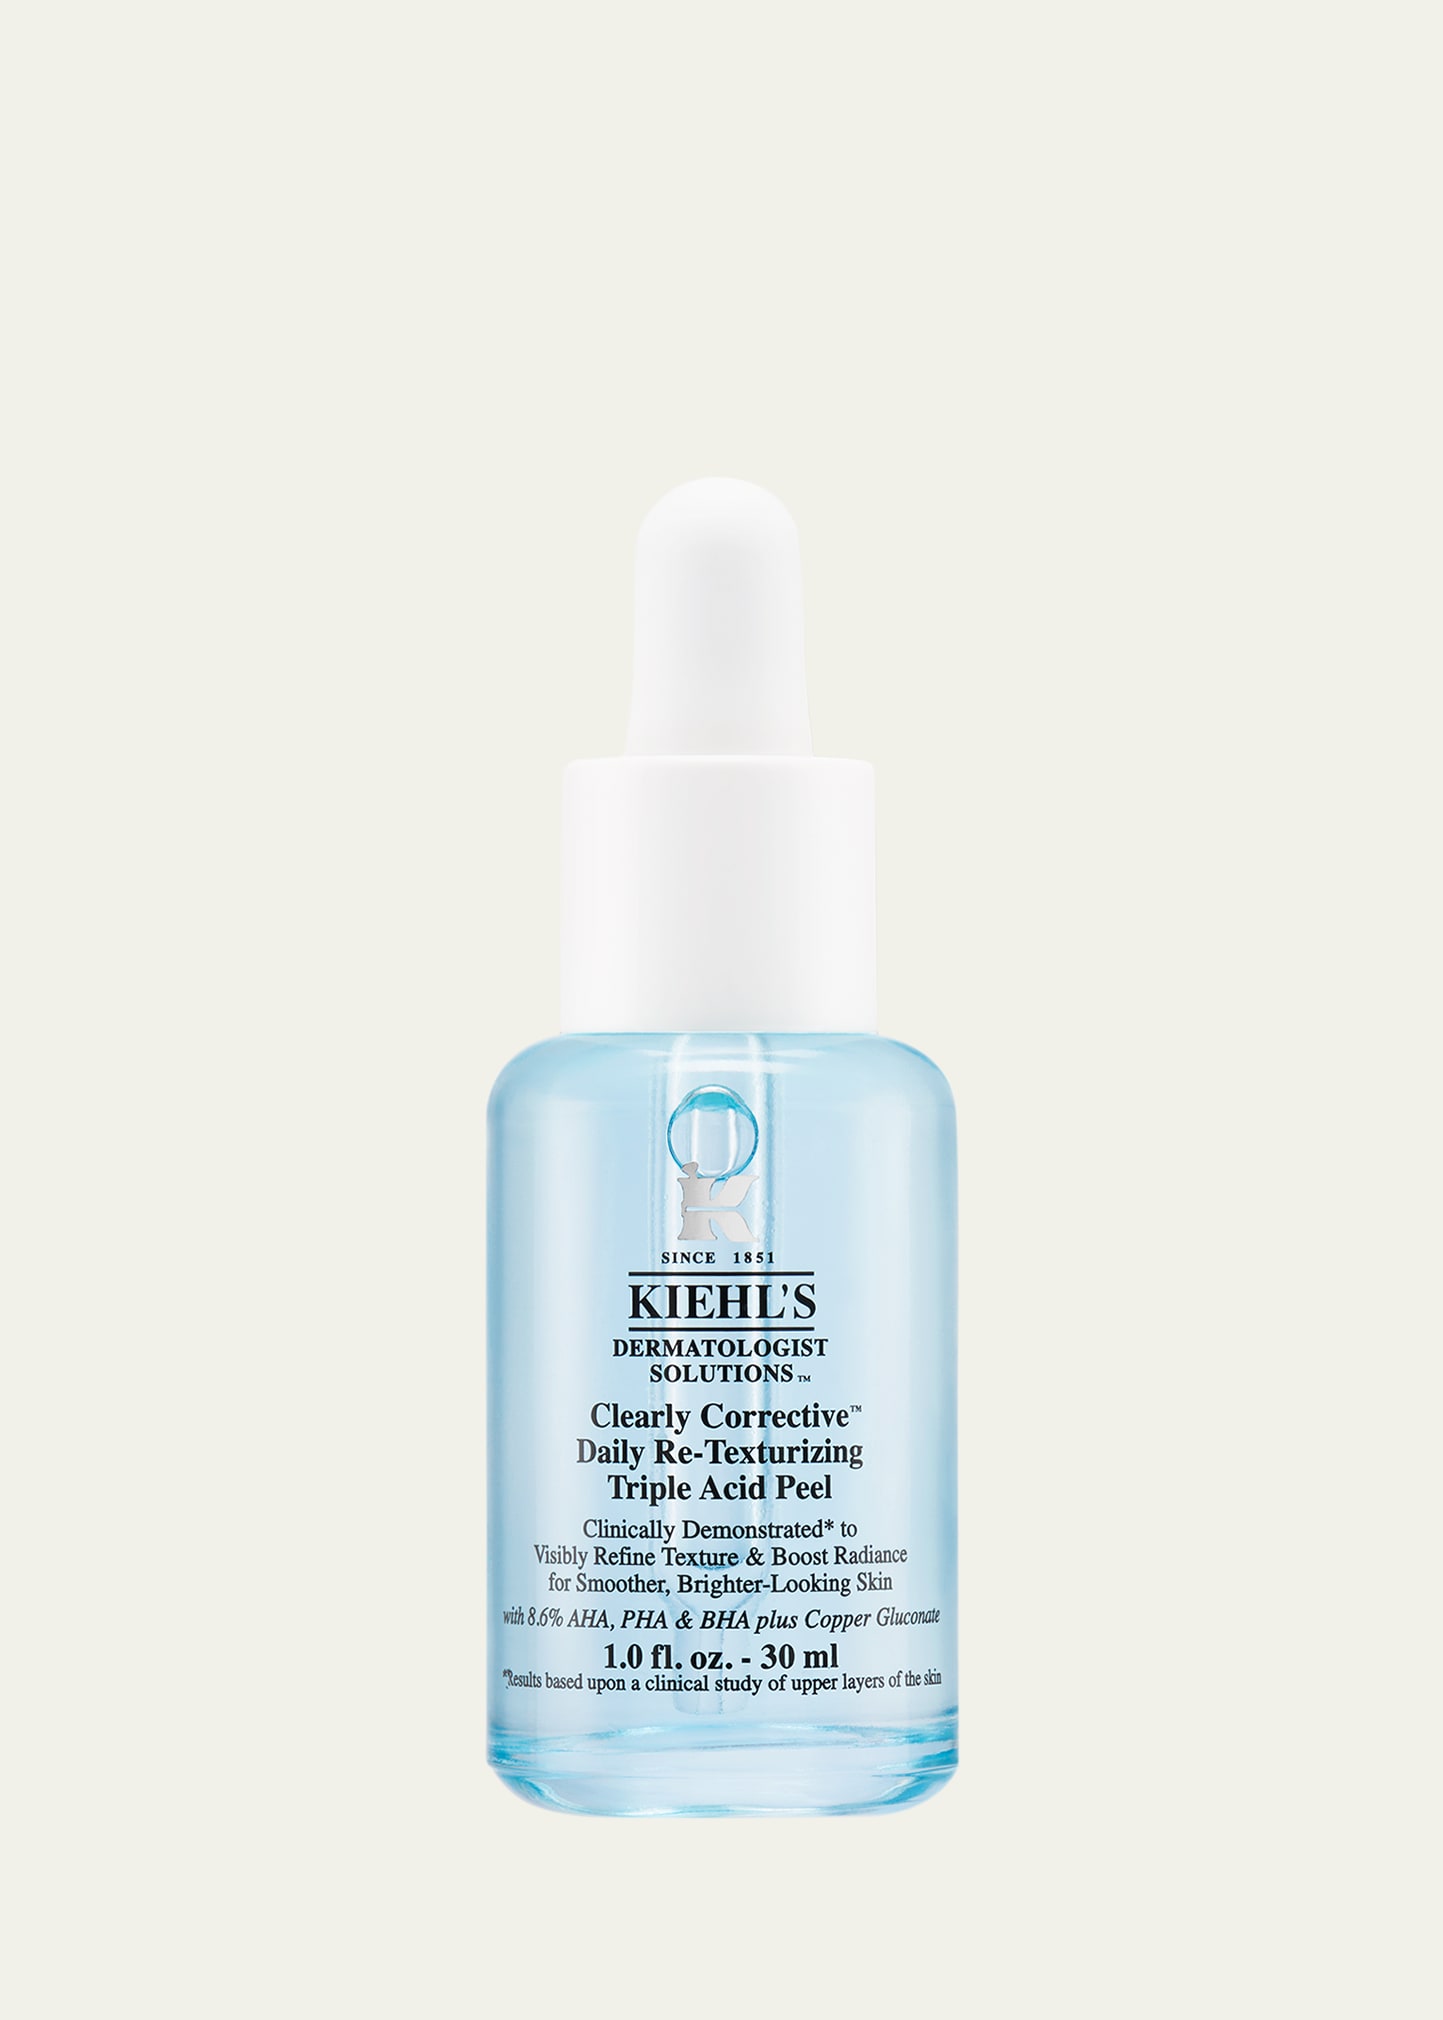 Kiehl's Since 1851 Clearly Corrective Daily Re-texturizing Triple Acid Peel, 1 Oz. In White